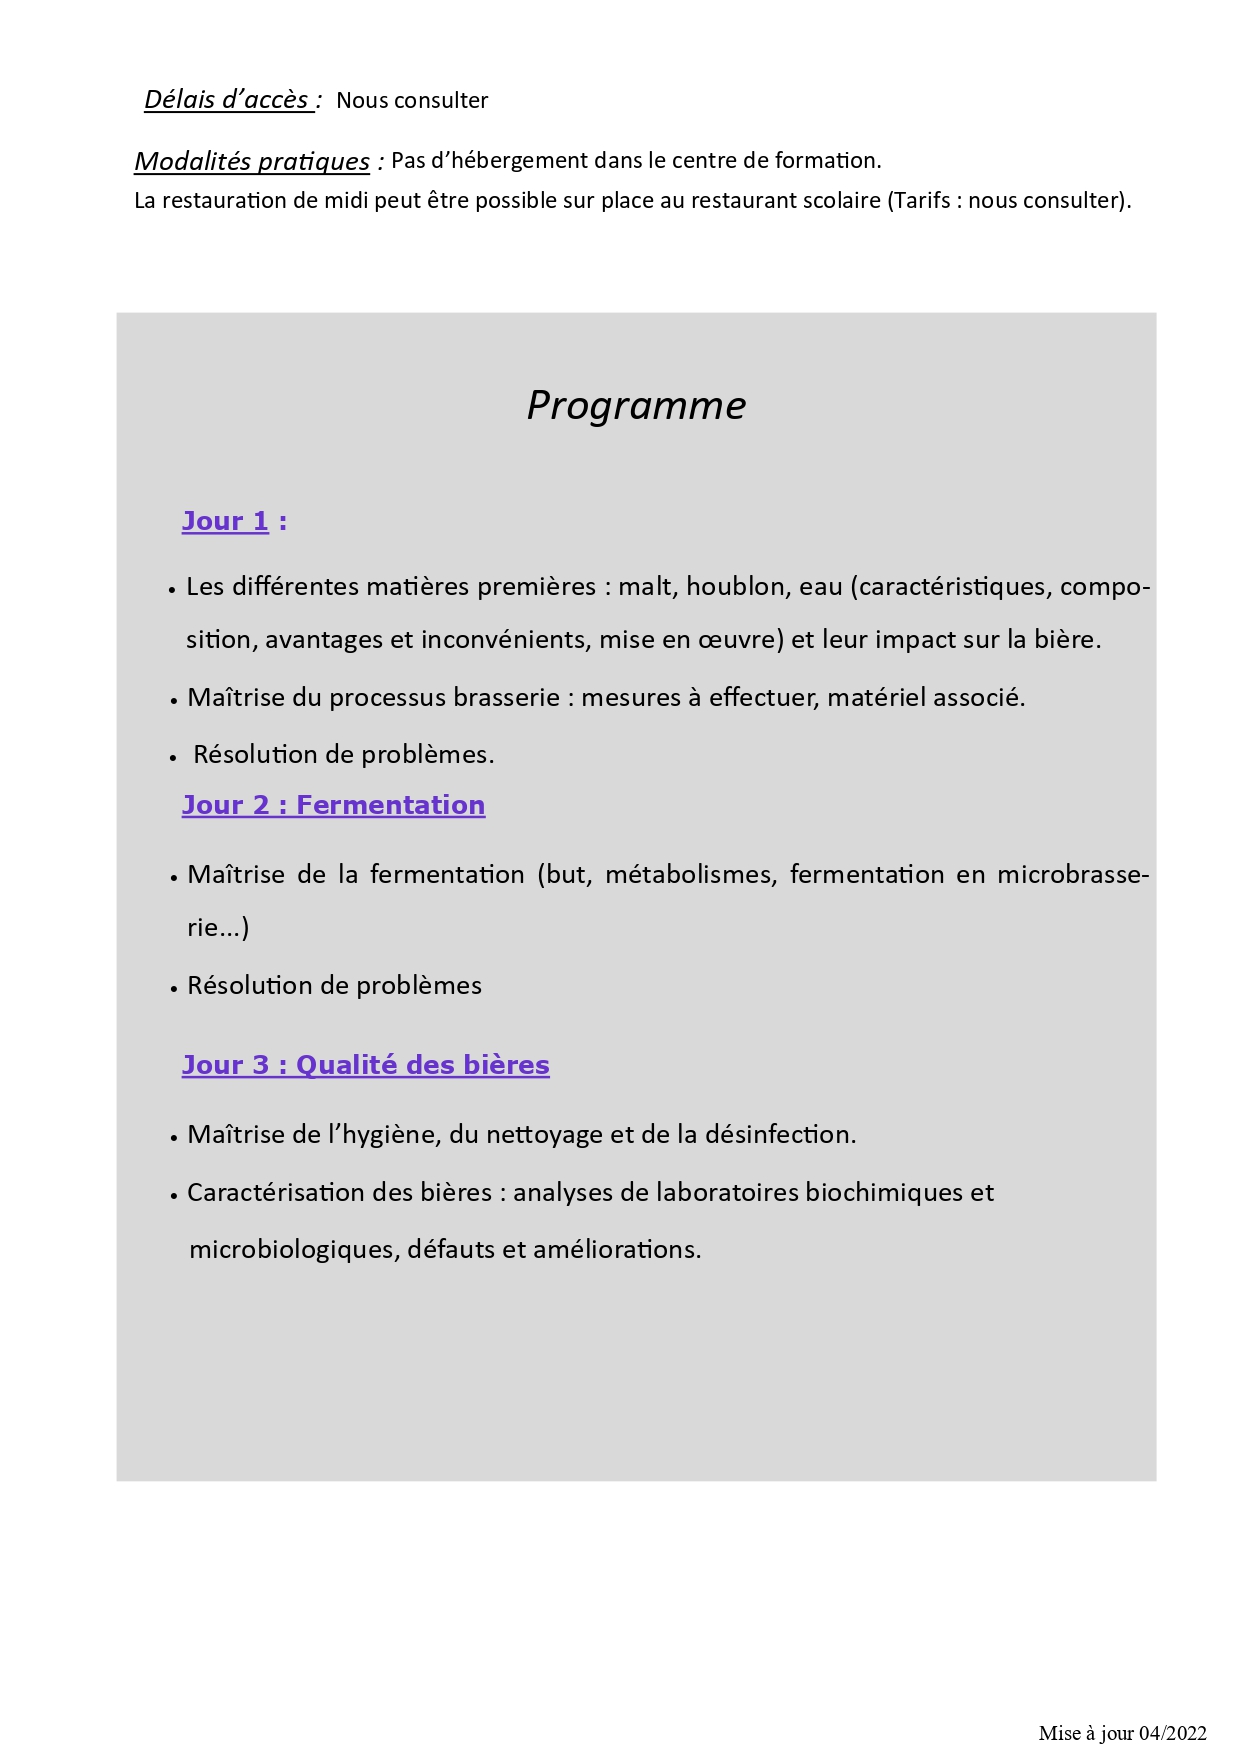 Fiche formation brasserie perfectionnement 3 jours avril22 page 0002